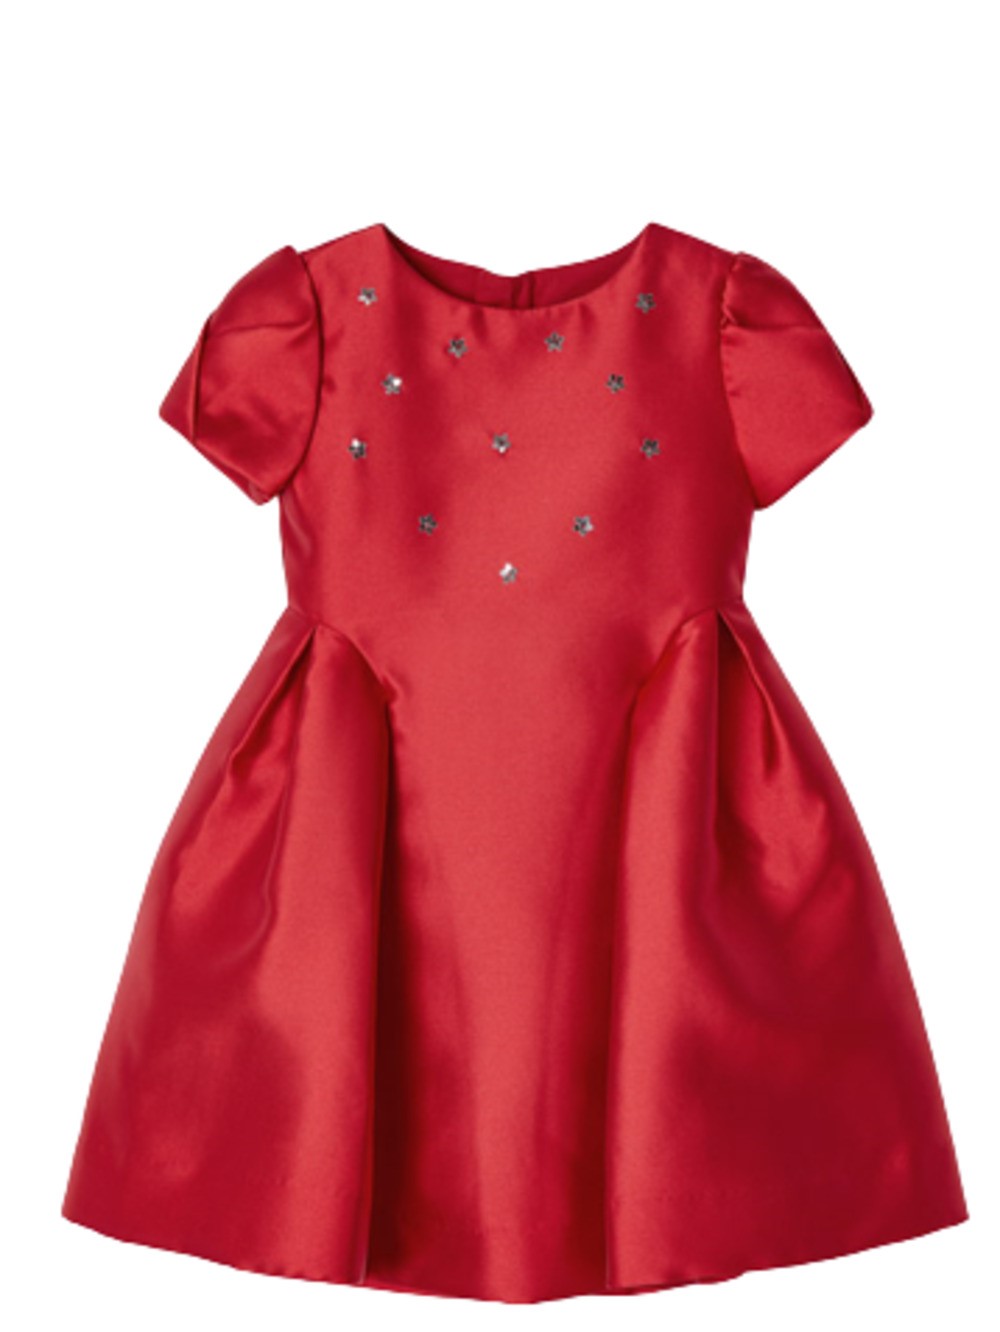 MAYORAL 4957 GIRLS RED SPECIAL OCCASION DRESS WITH SHINY DECOR